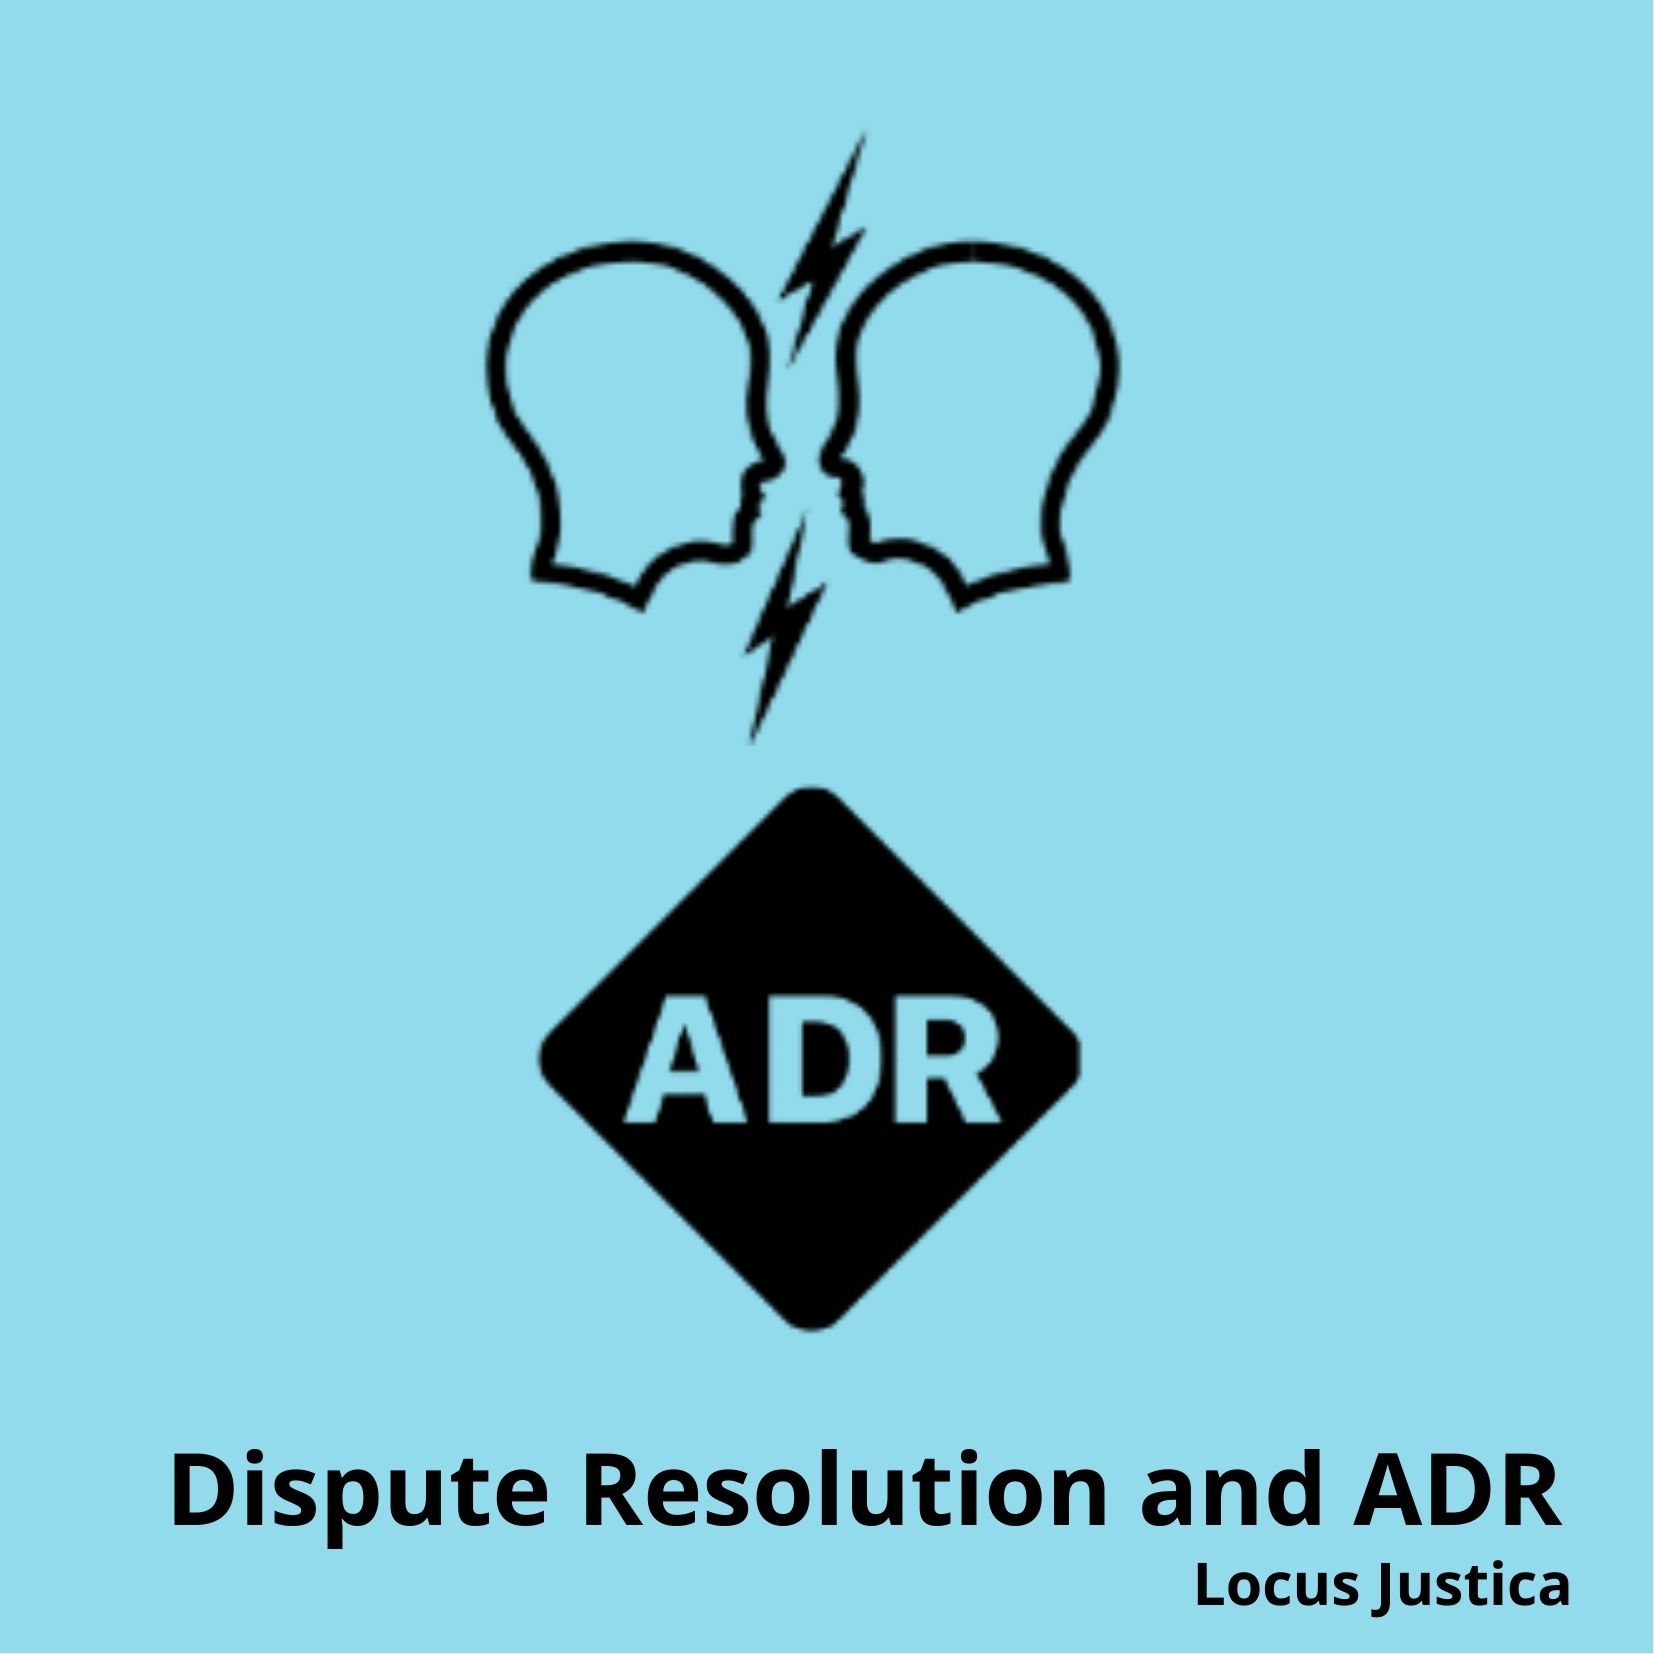 Dispute resolution and ADR